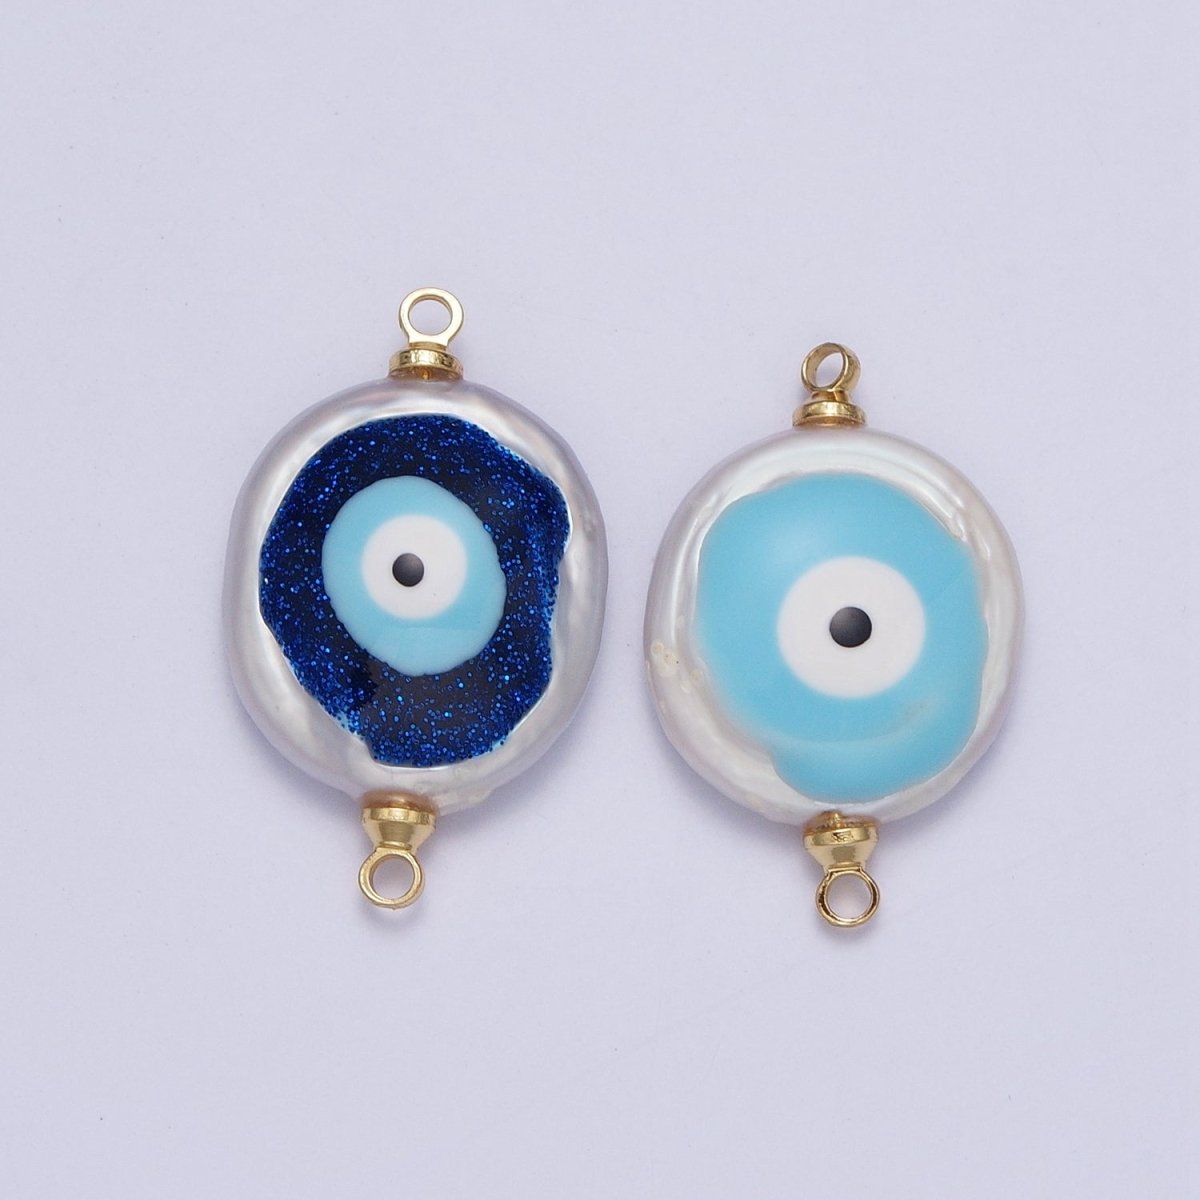 Gold Filled Flat Button Pearl Connector with Glitter Blue Evil Eye Enamel Link Charm For Jewelry Making G-542 G-543 - DLUXCA